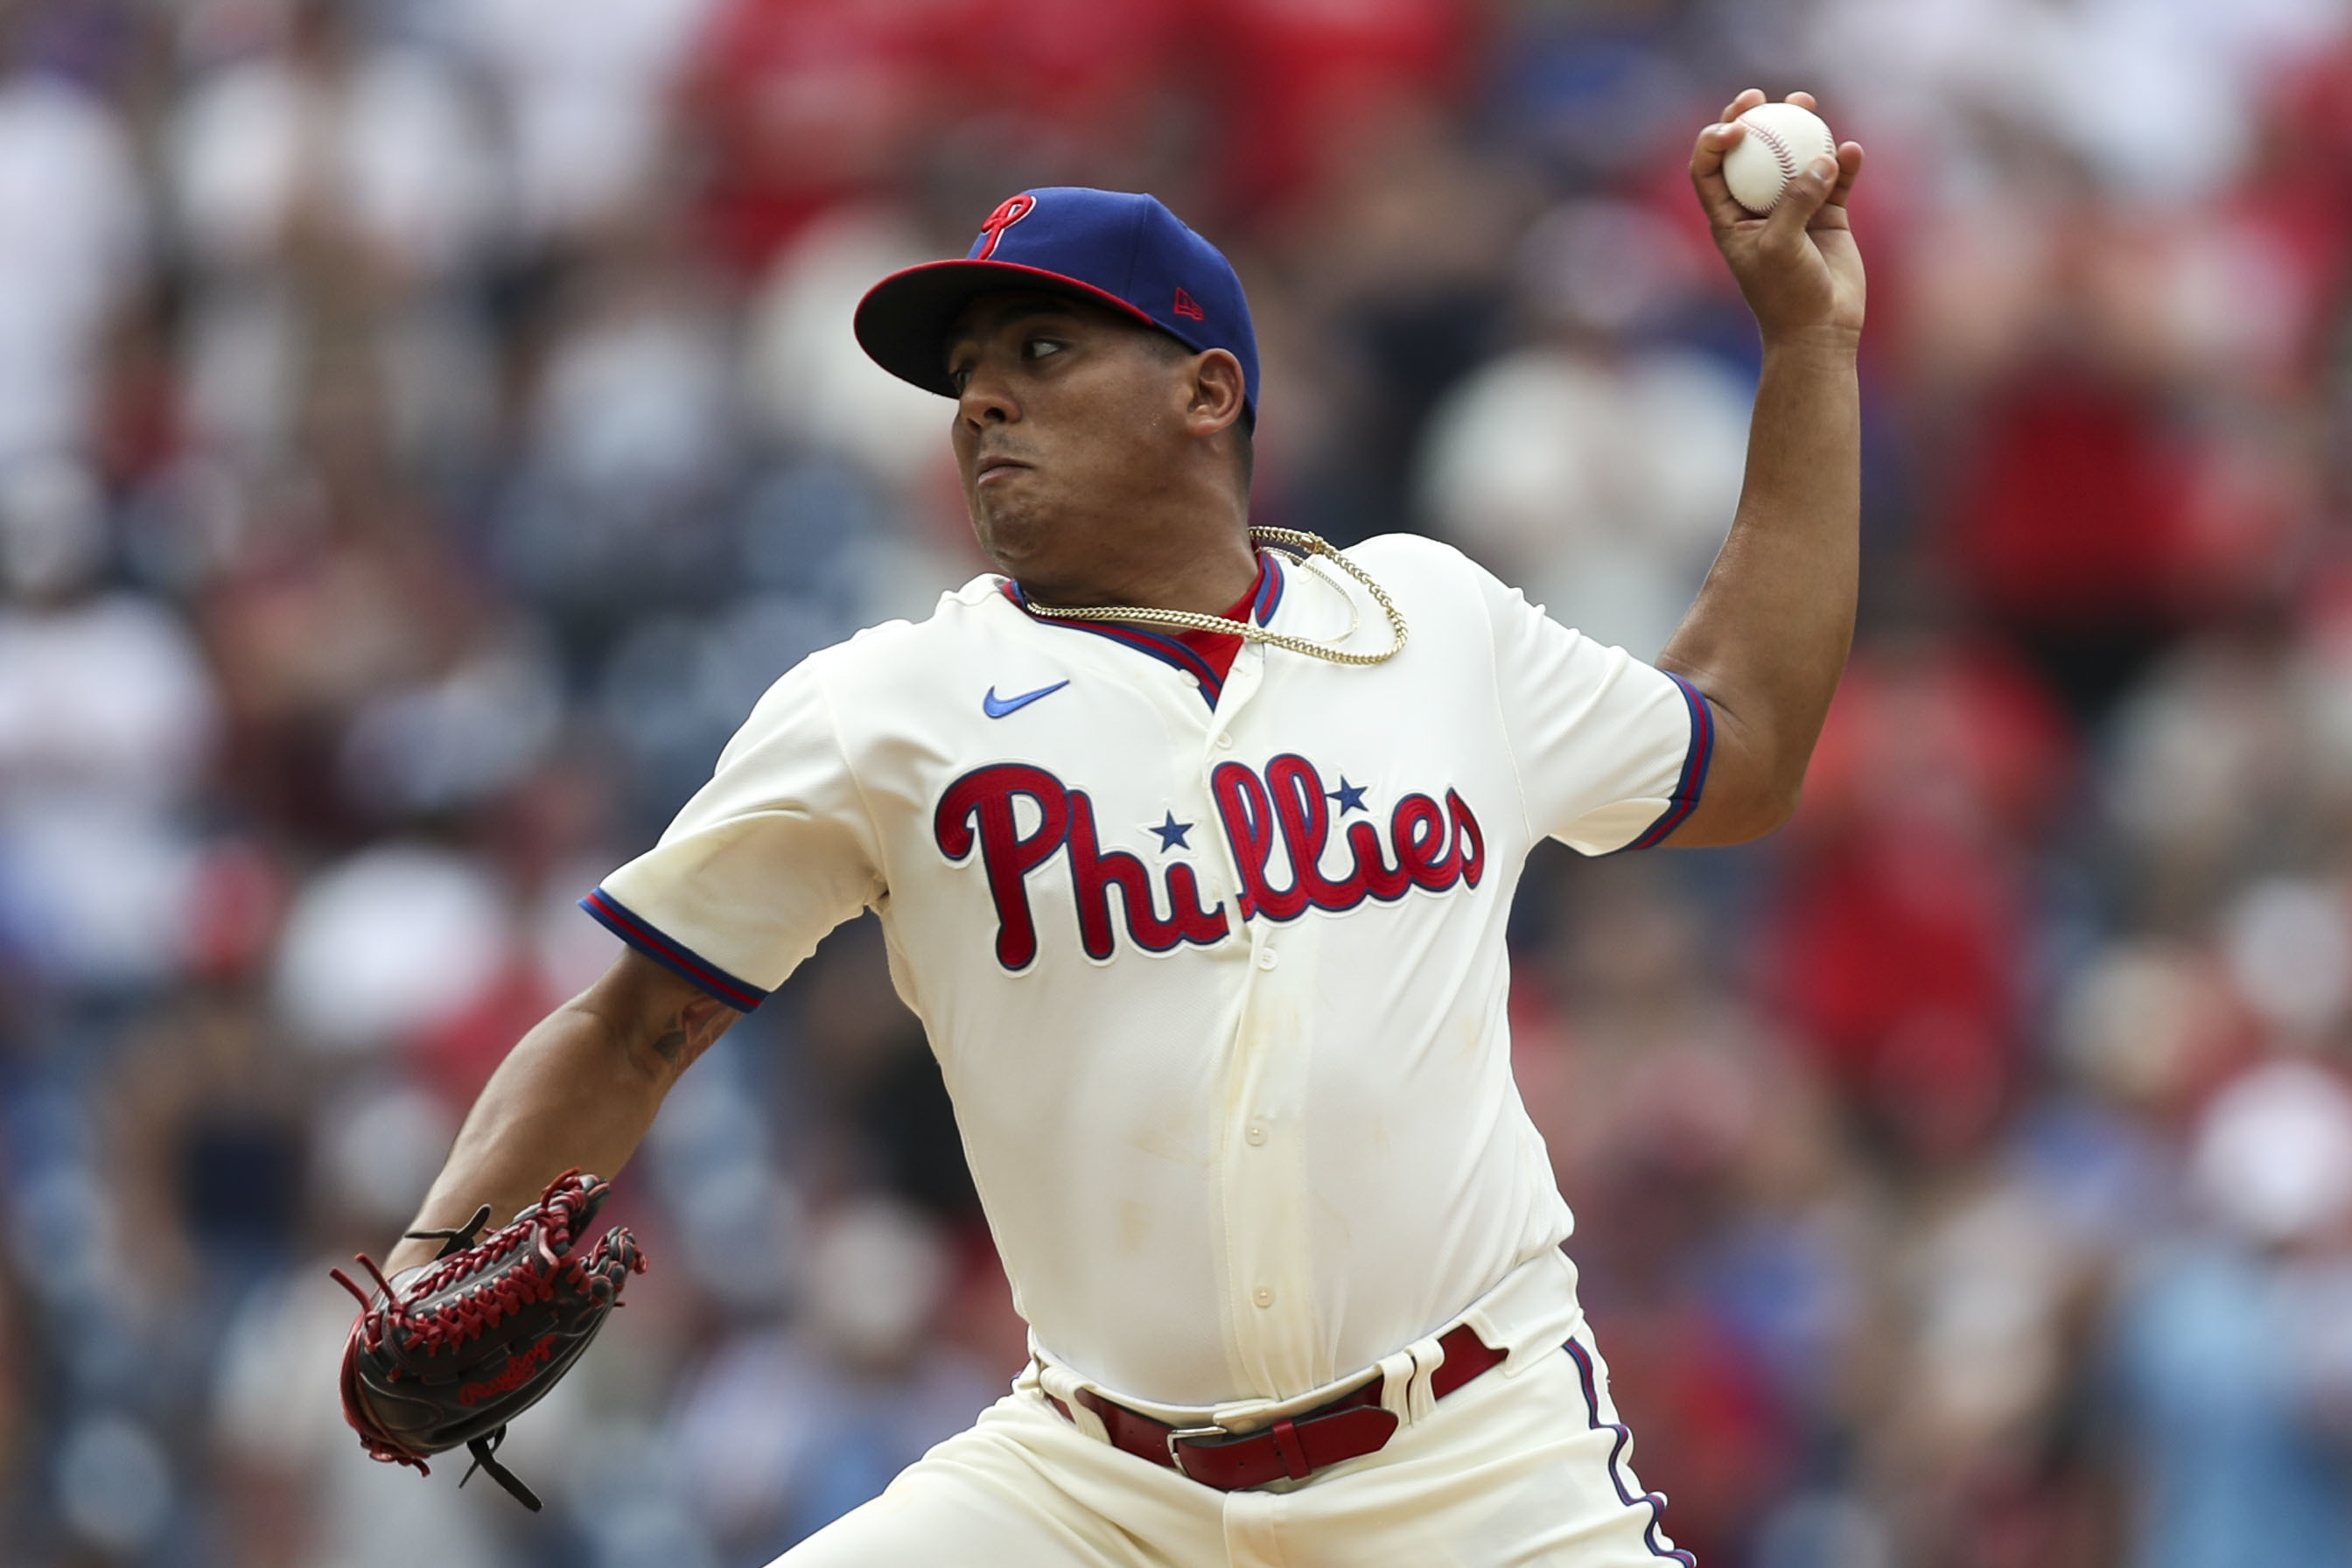 Ranger Suarez became Phillies closer thanks to his two-seam sinker